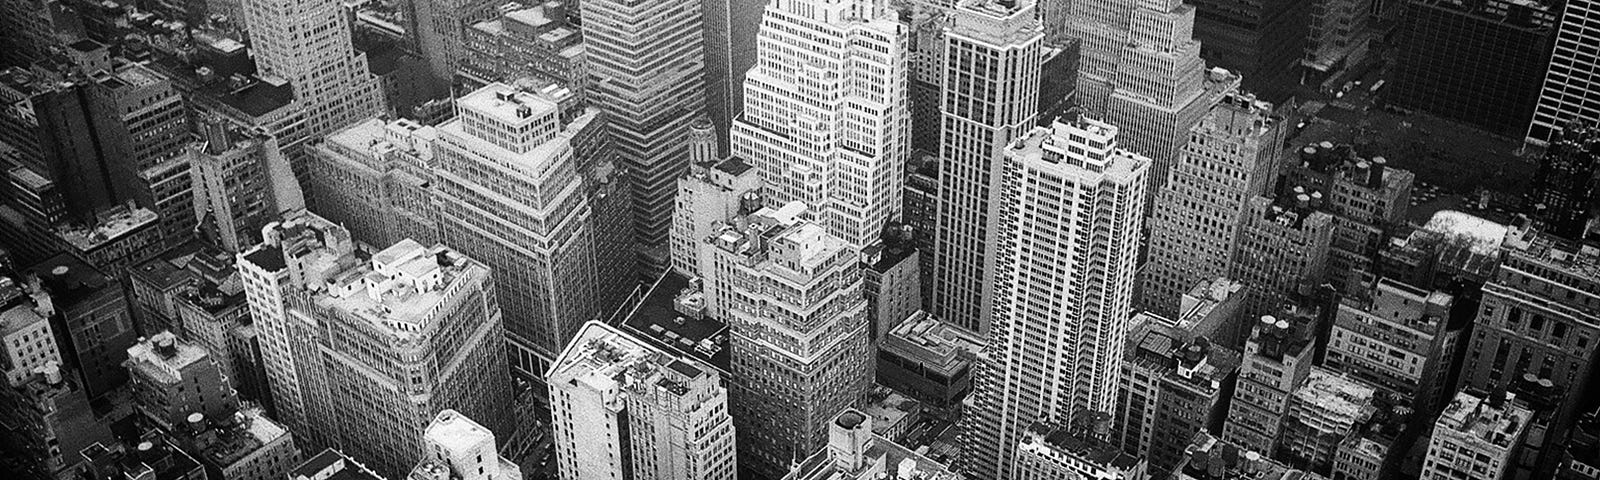 Aerial View and Grayscale Photography of High-rise Buildings